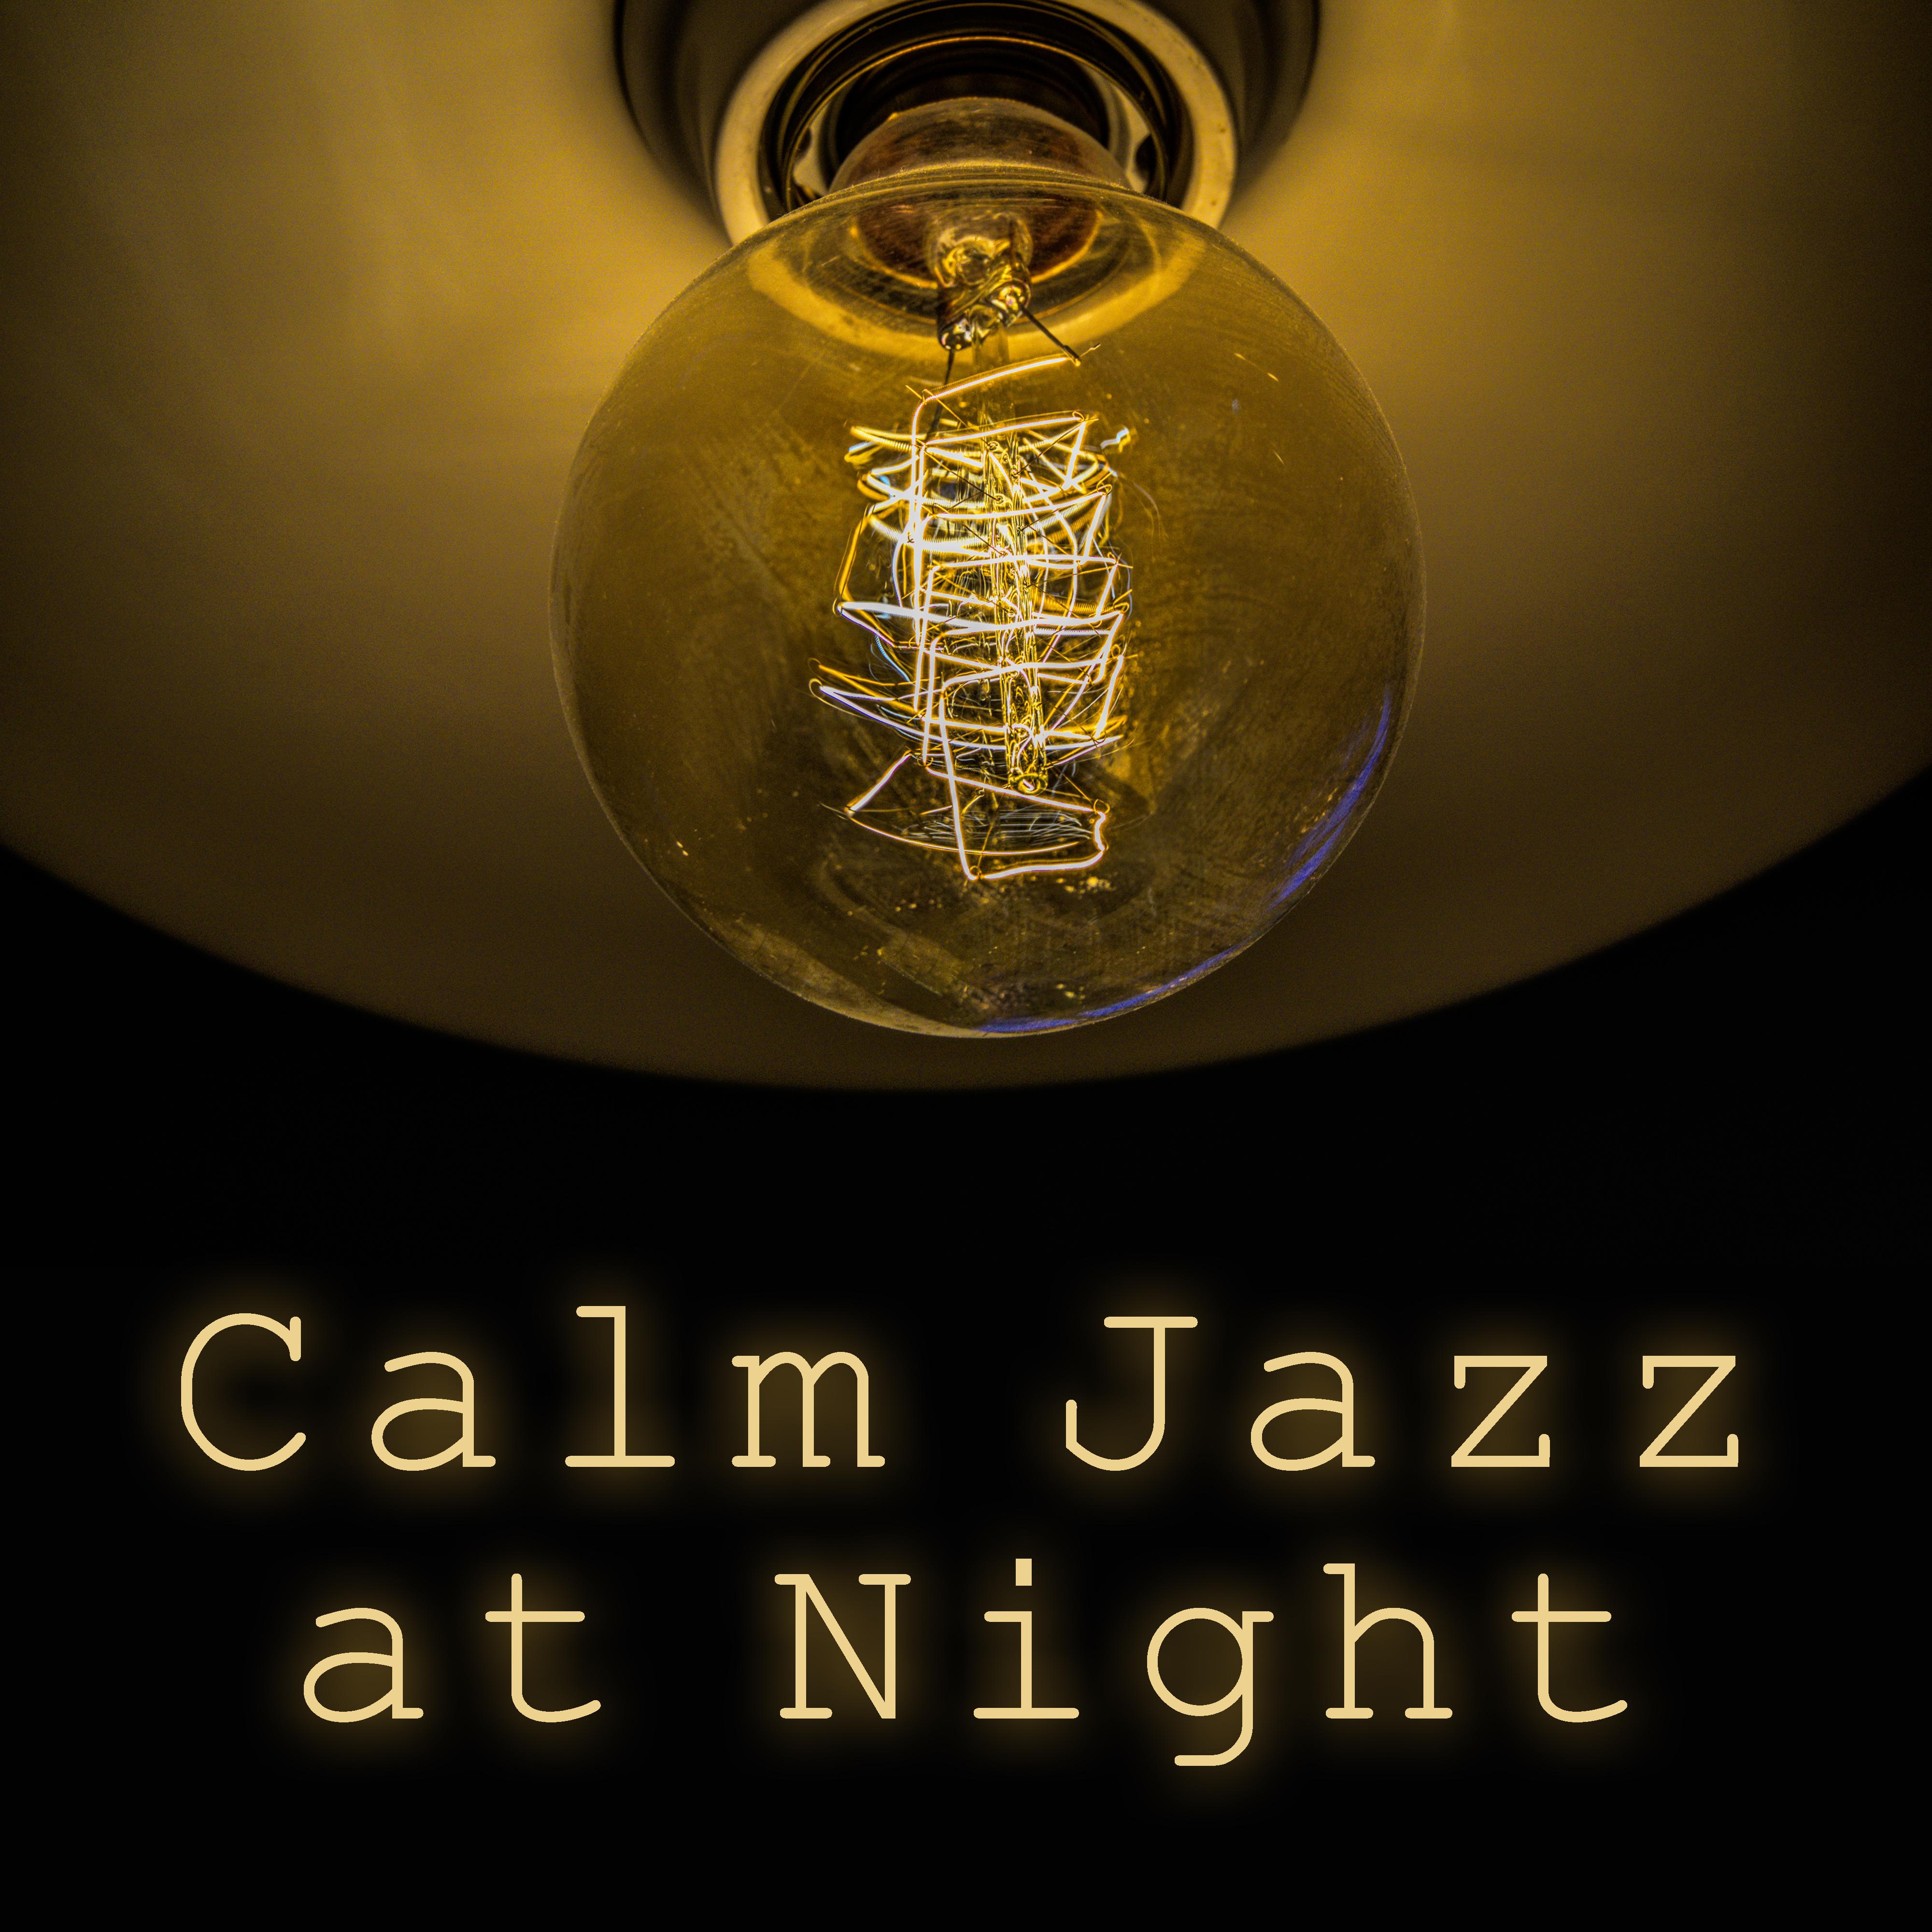 Calm Jazz at Night – Relaxing Jazz 2017, Music for Bedtime, Pure Relaxation Time, Ambient Jazz